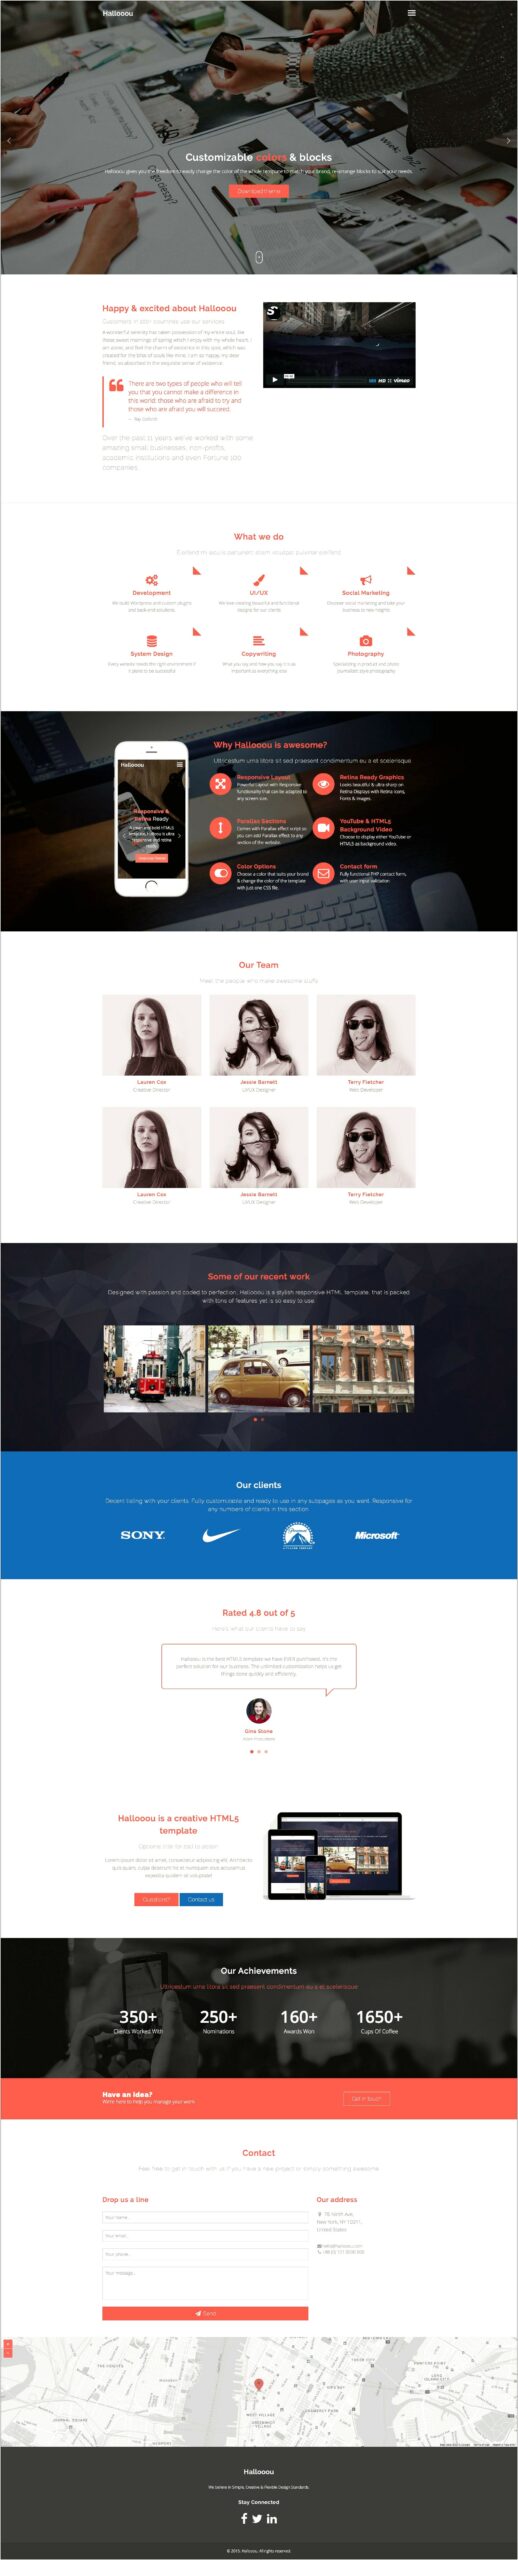 Html5 One Page Template Slider Parallax Free